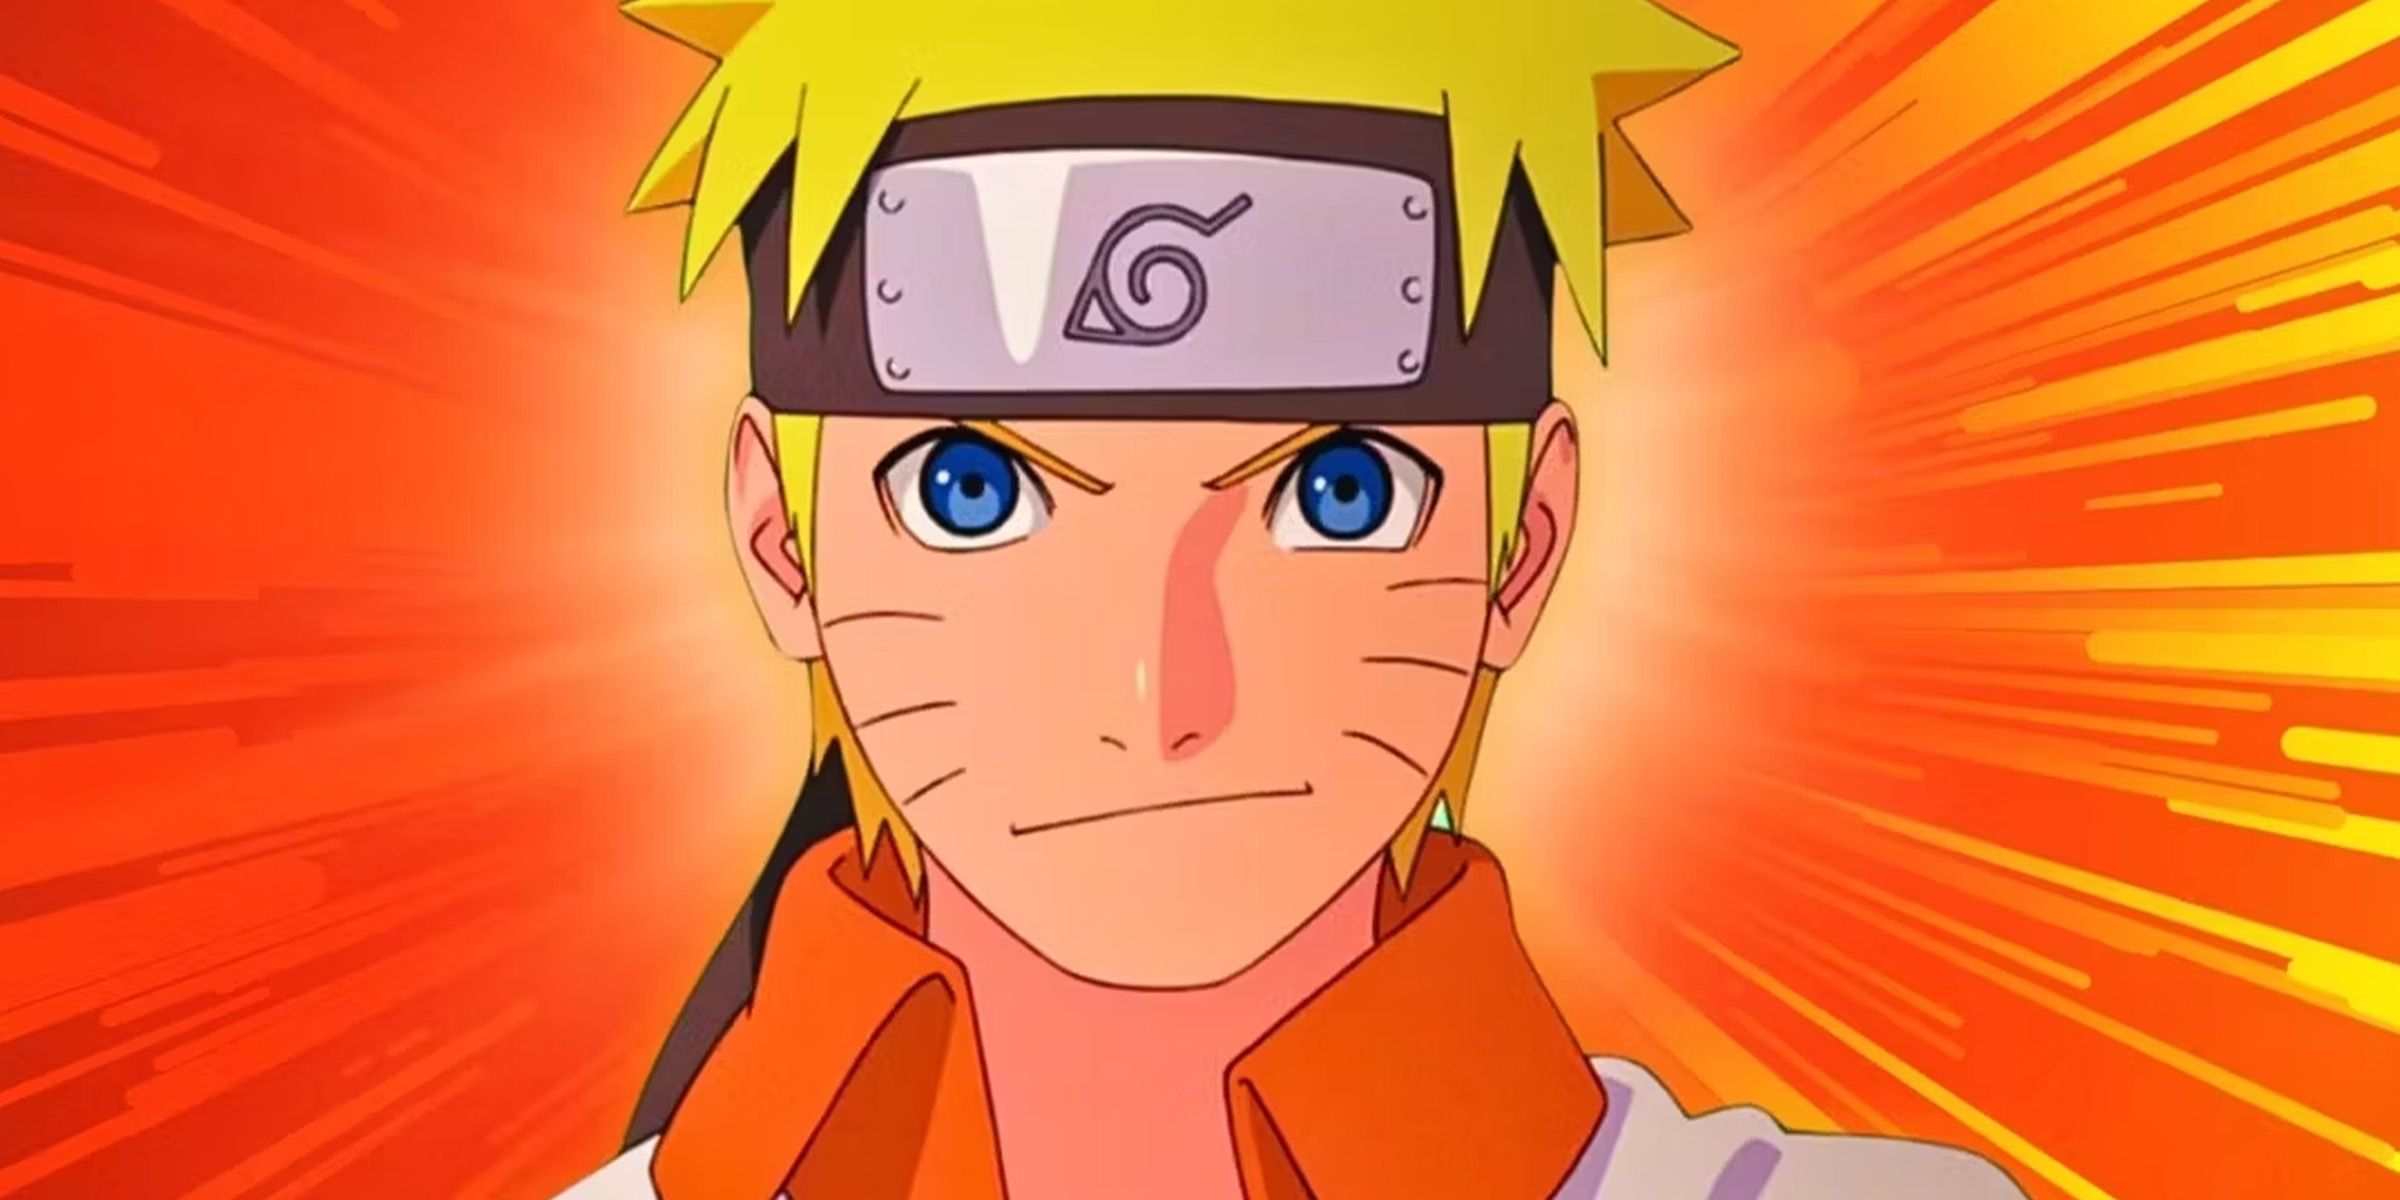 Naruto from the anime adaptation against a colorful orange background